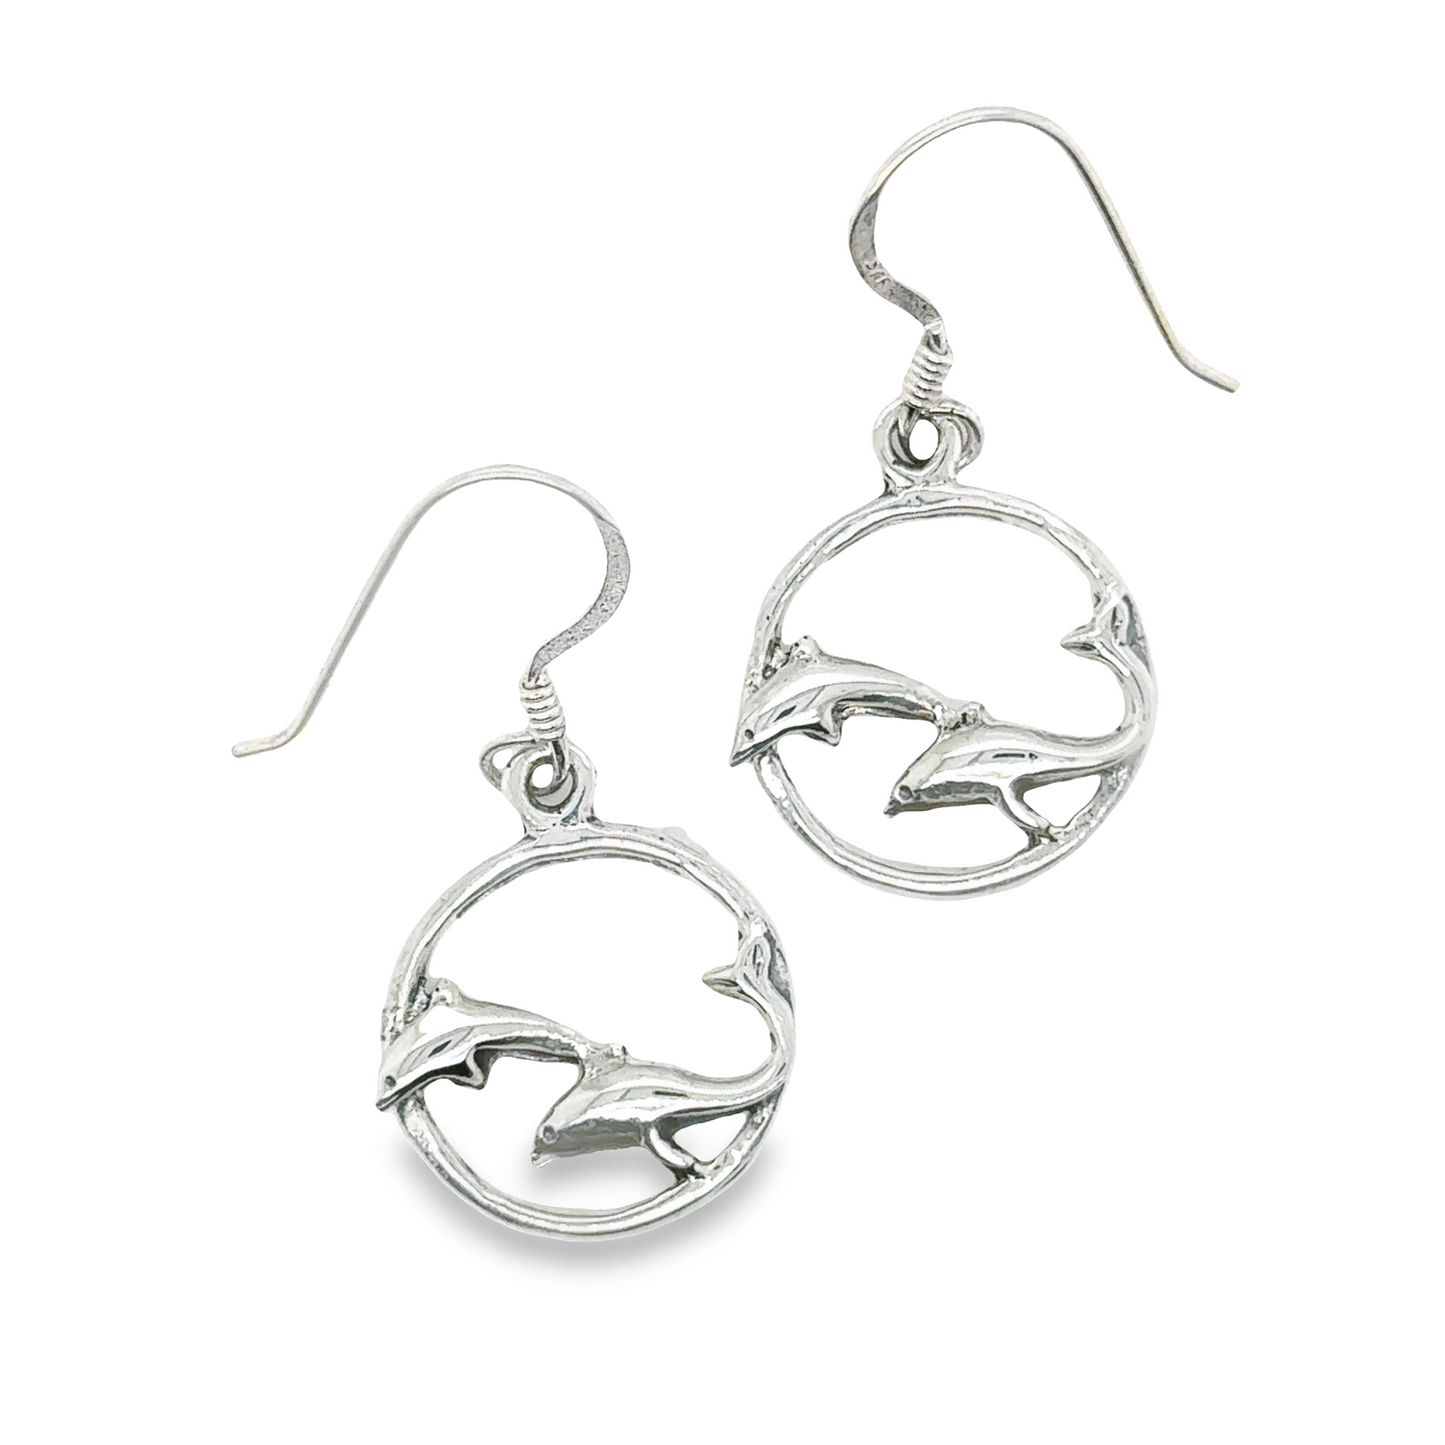 A pair of Playful Dolphin Earrings by Super Silver, inspired by the oceanic beauty of Santa Cruz.